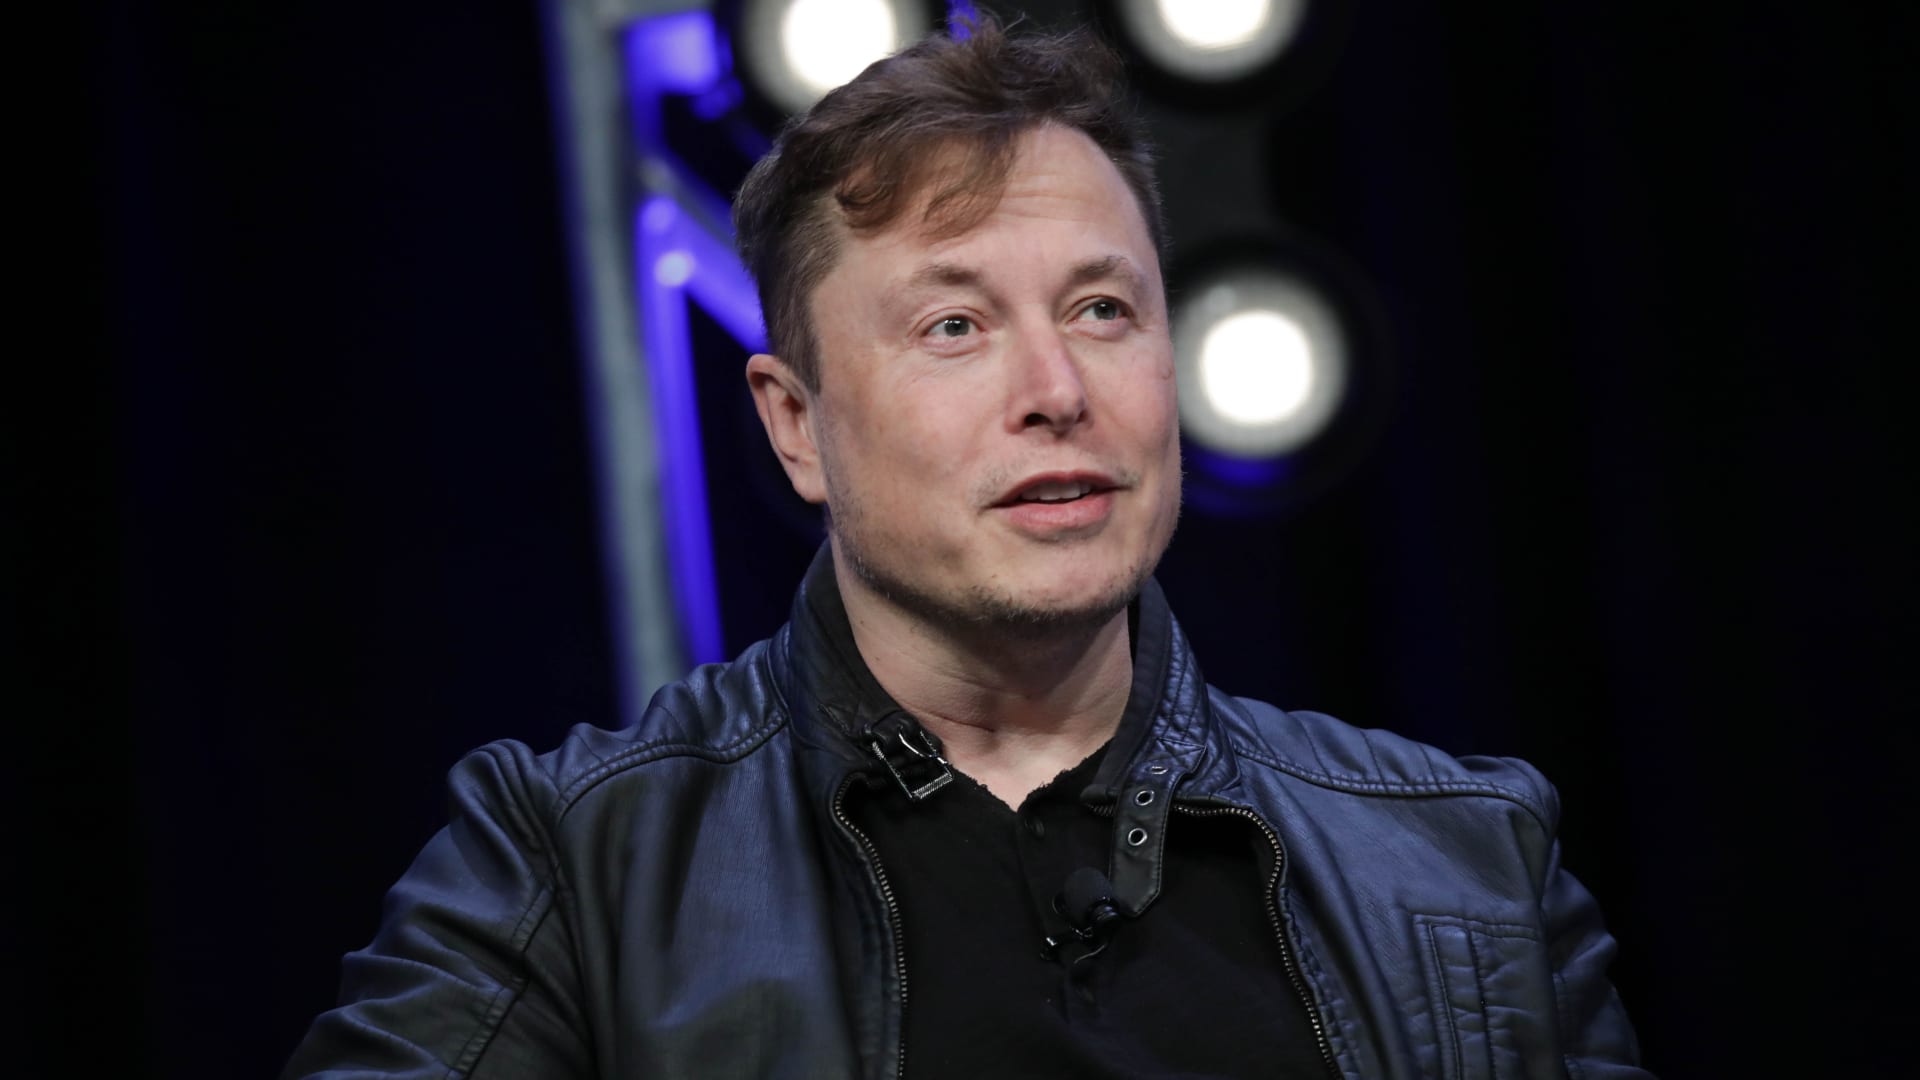 Elon Musk has criticized Apple for years. Apple has mostly ignored him